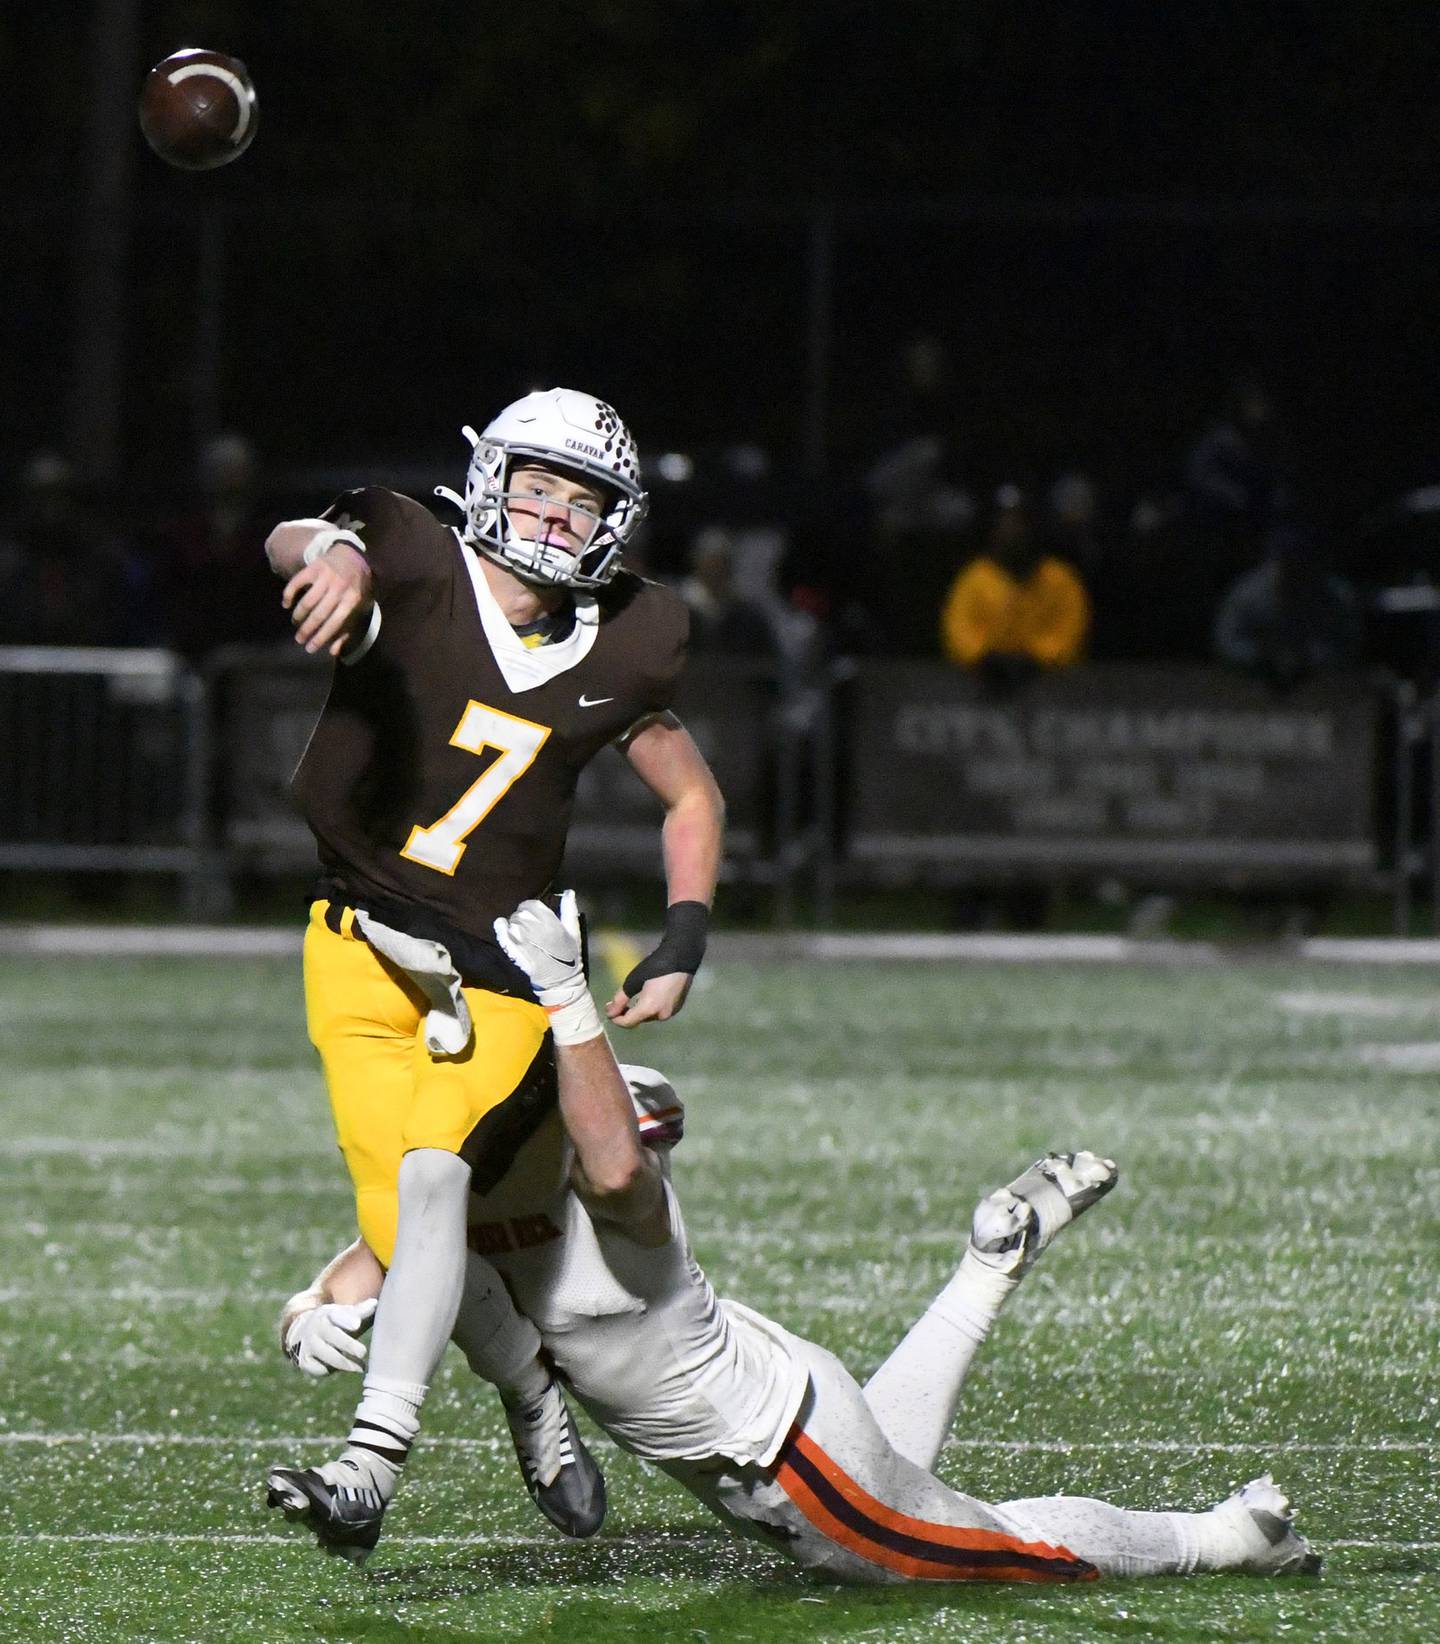 Mount Carmel's Blainey Dowling (7) gets a pass off as Brother Rice's Henry Ivers tries to bring him down during a Class 7A state quarterfinal game in Chicago on Saturday, Nov. 12, 2022.